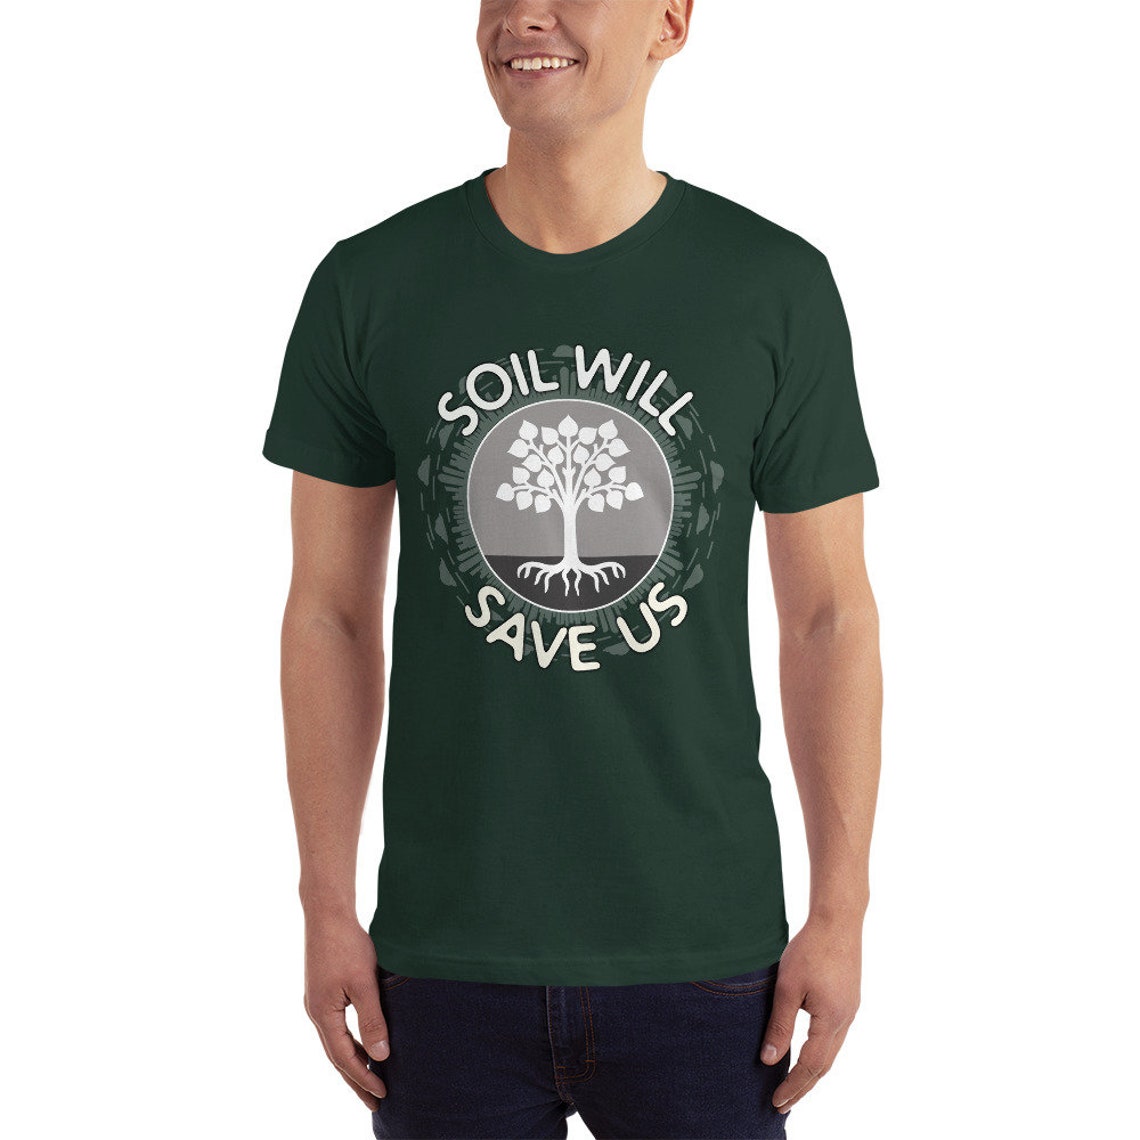 Soil Will Save Us T-shirt for Farmers Gardeners and | Etsy